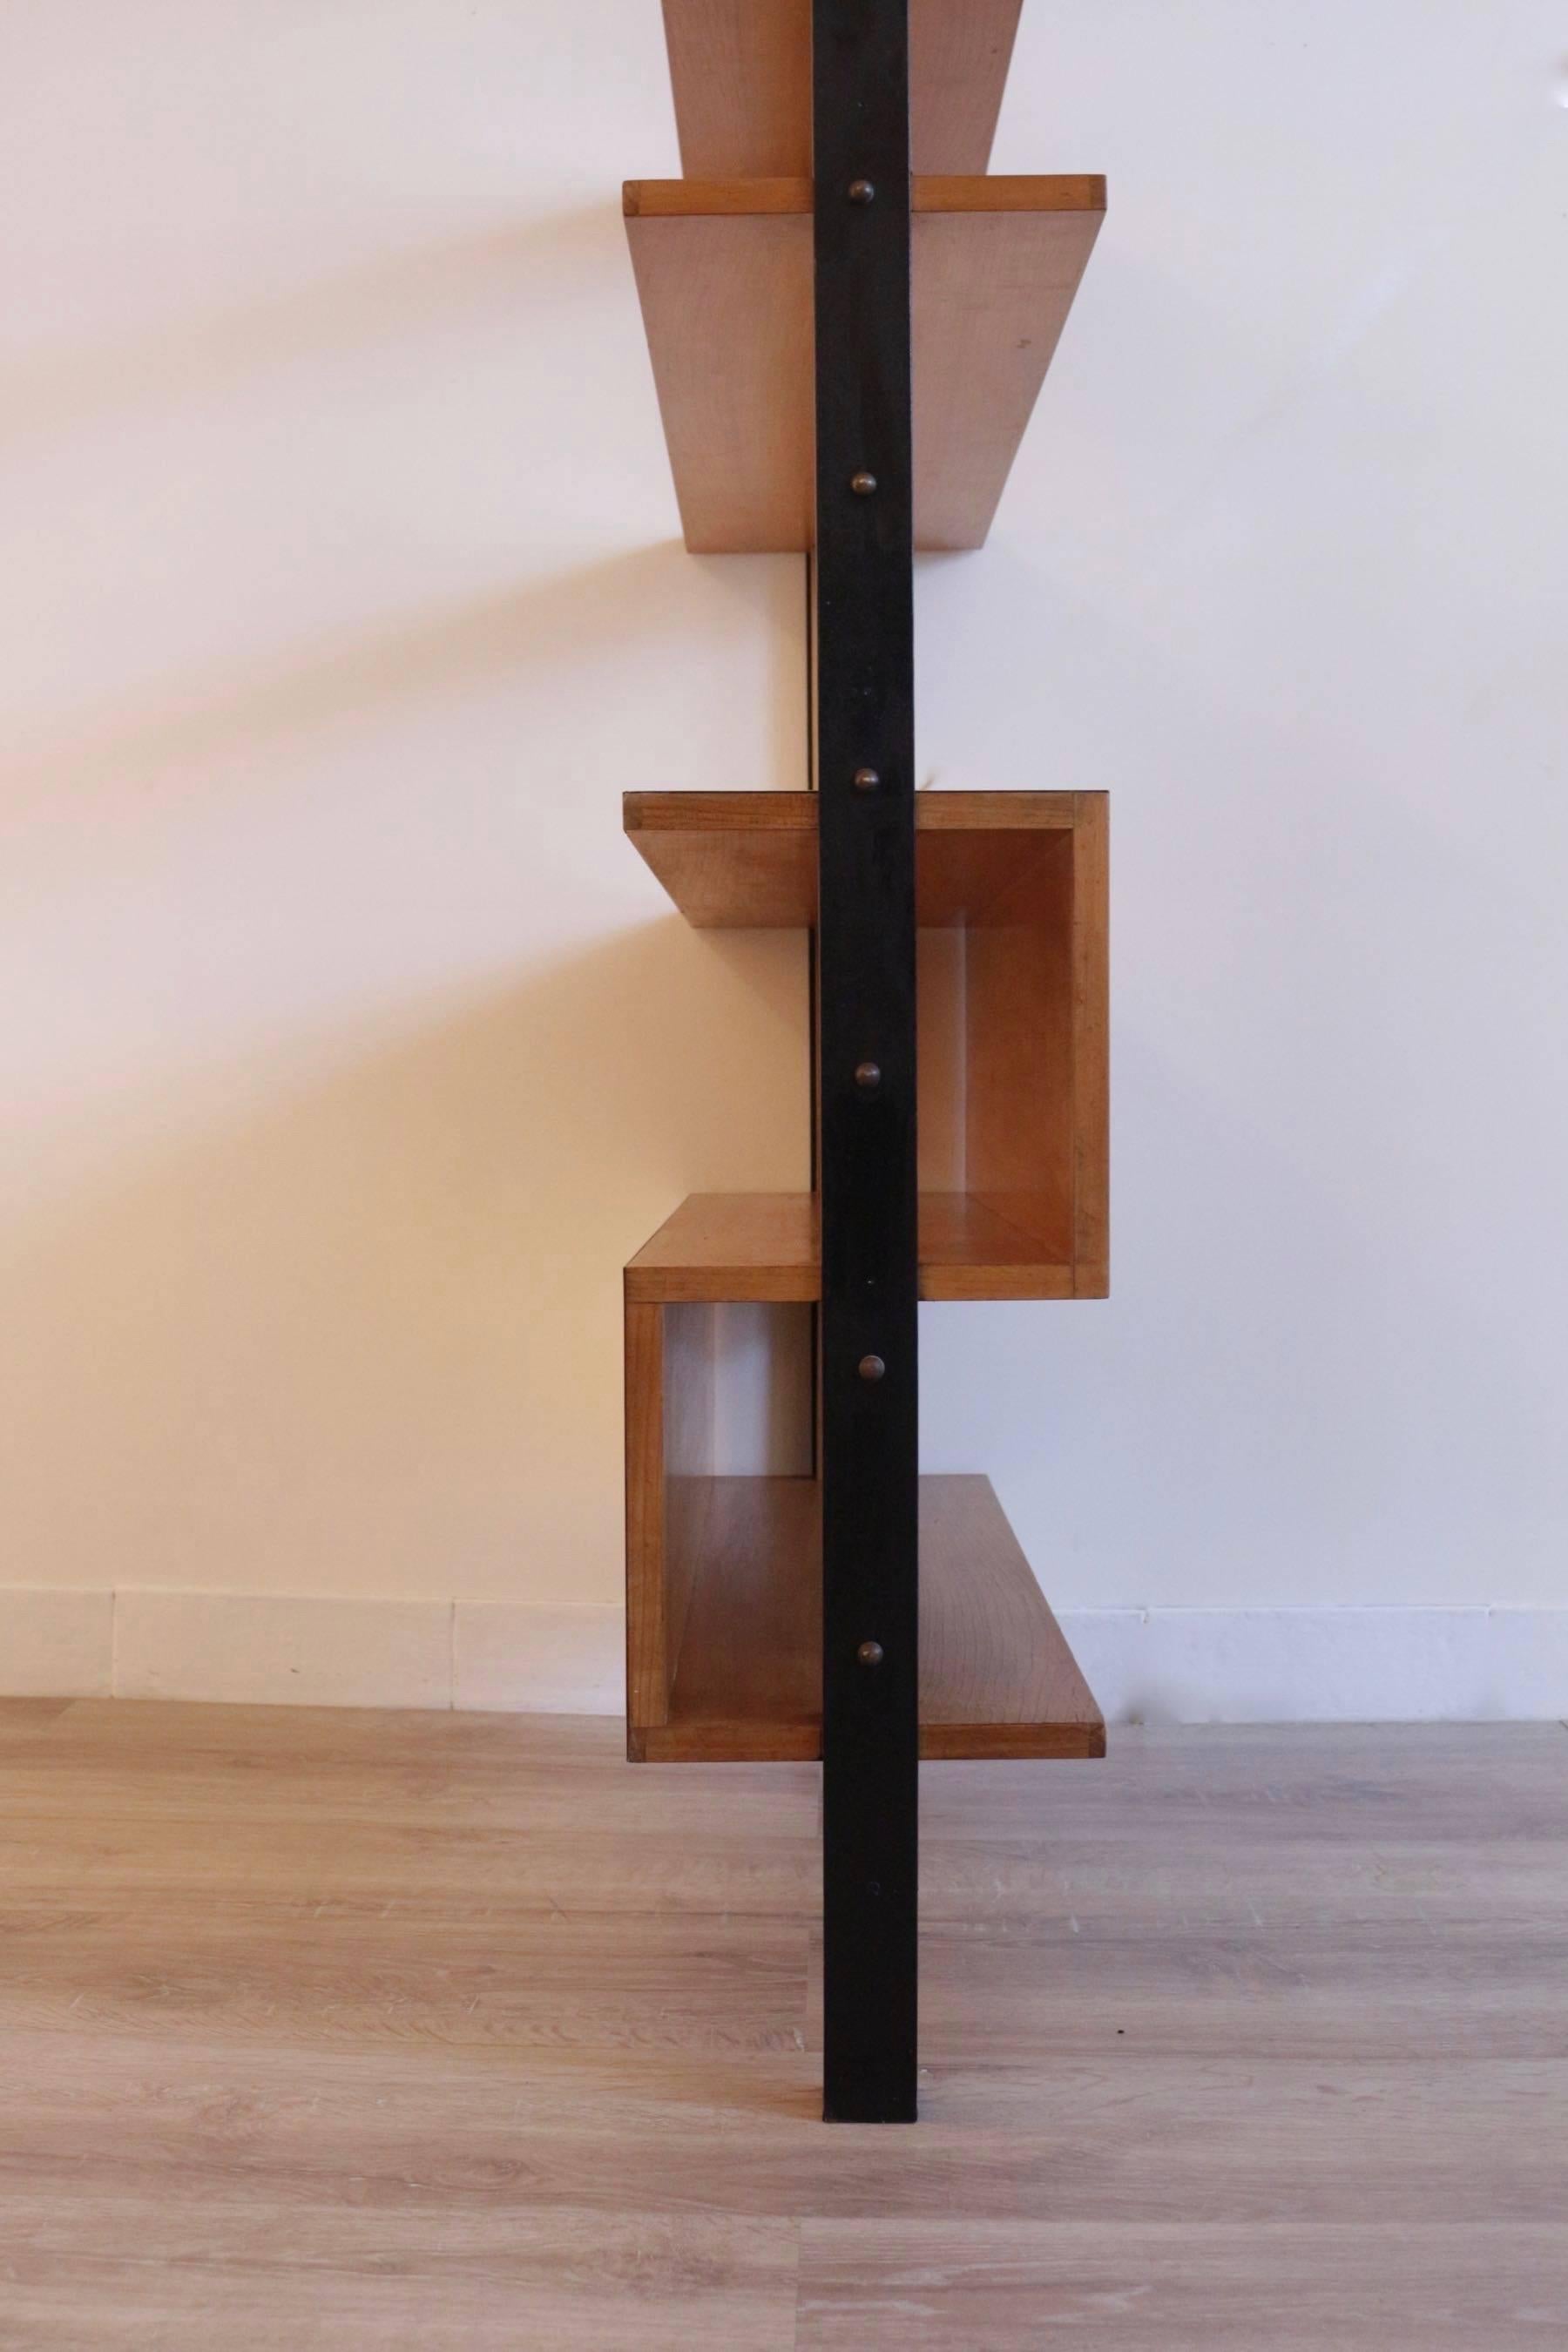 1950 cherrywood bookshelf  to Pierre Guariche.

Free standing bookshelf composed by a large black lacquered steel frame, highlighted with brass cabochons. 

On the upper part, three cherrywood shelves and on the lower part, two storages white